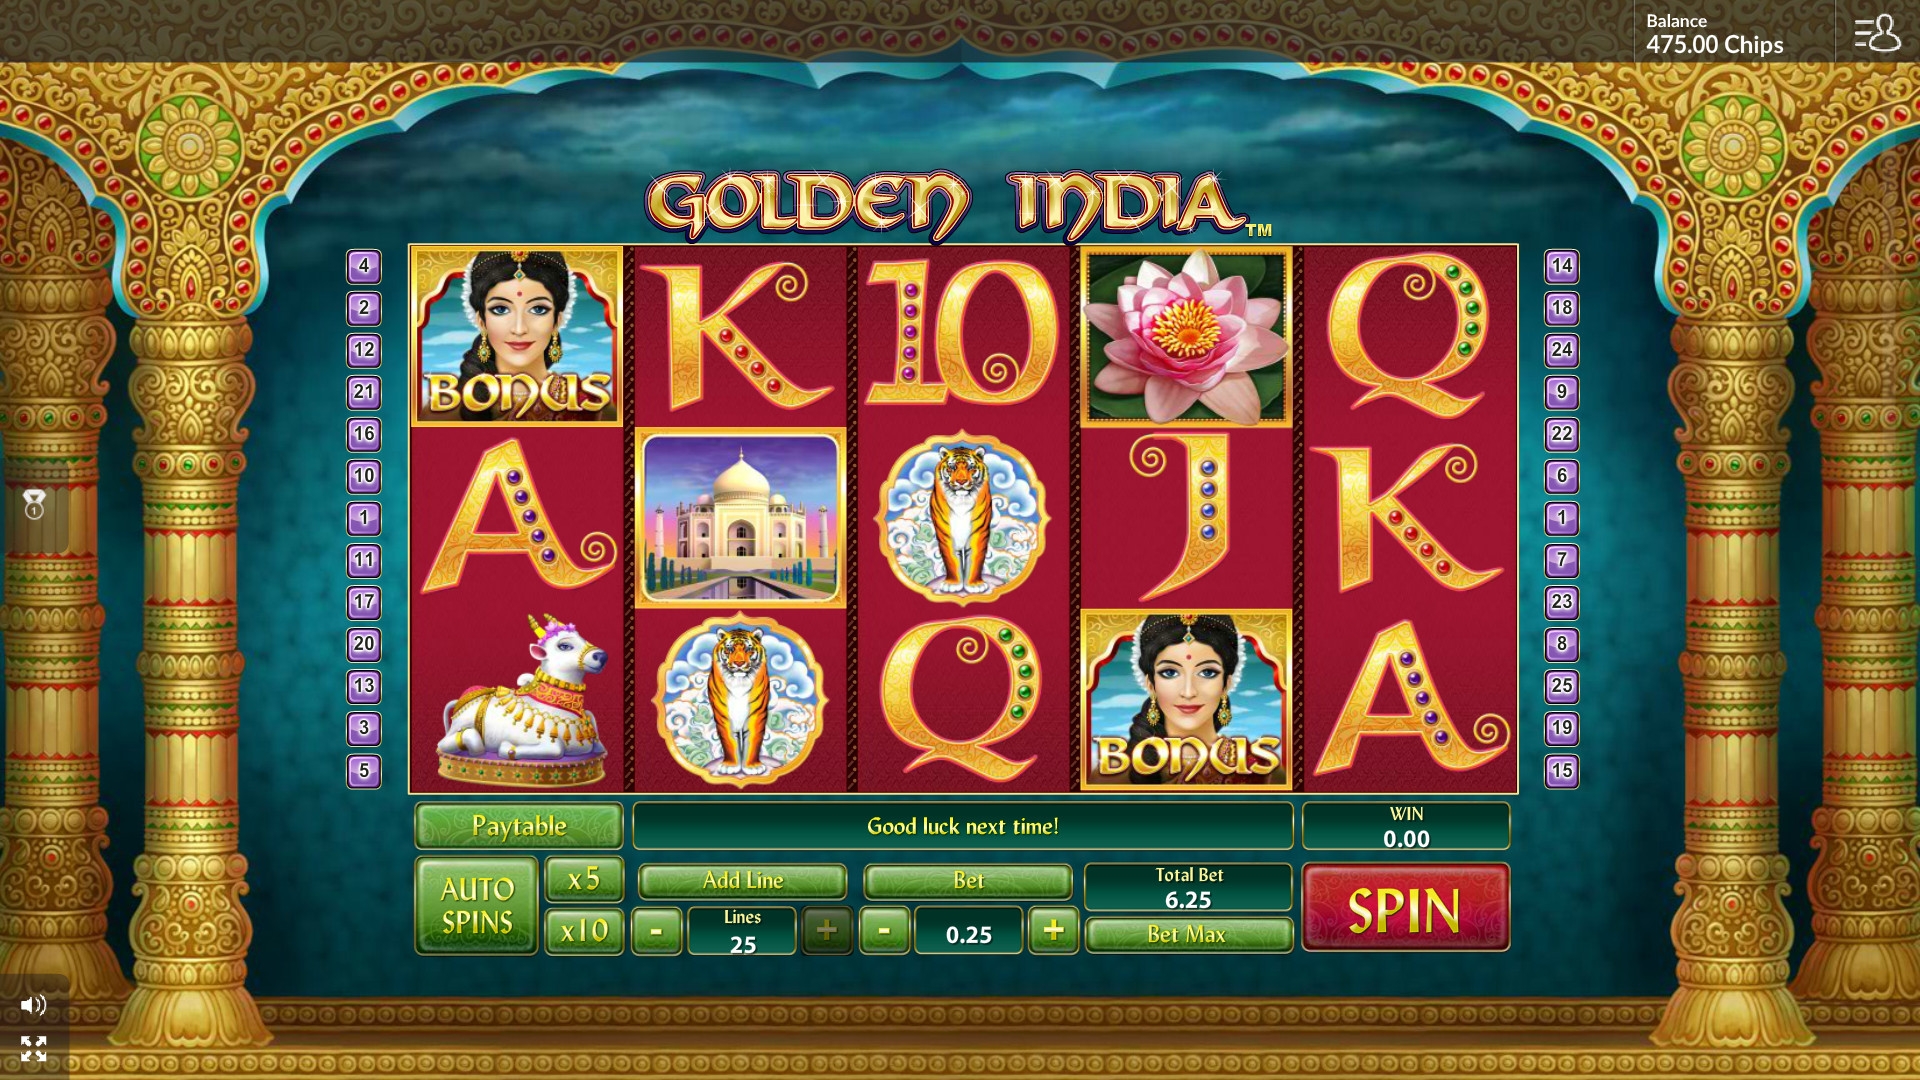 Golden India (Golden India) from category Slots